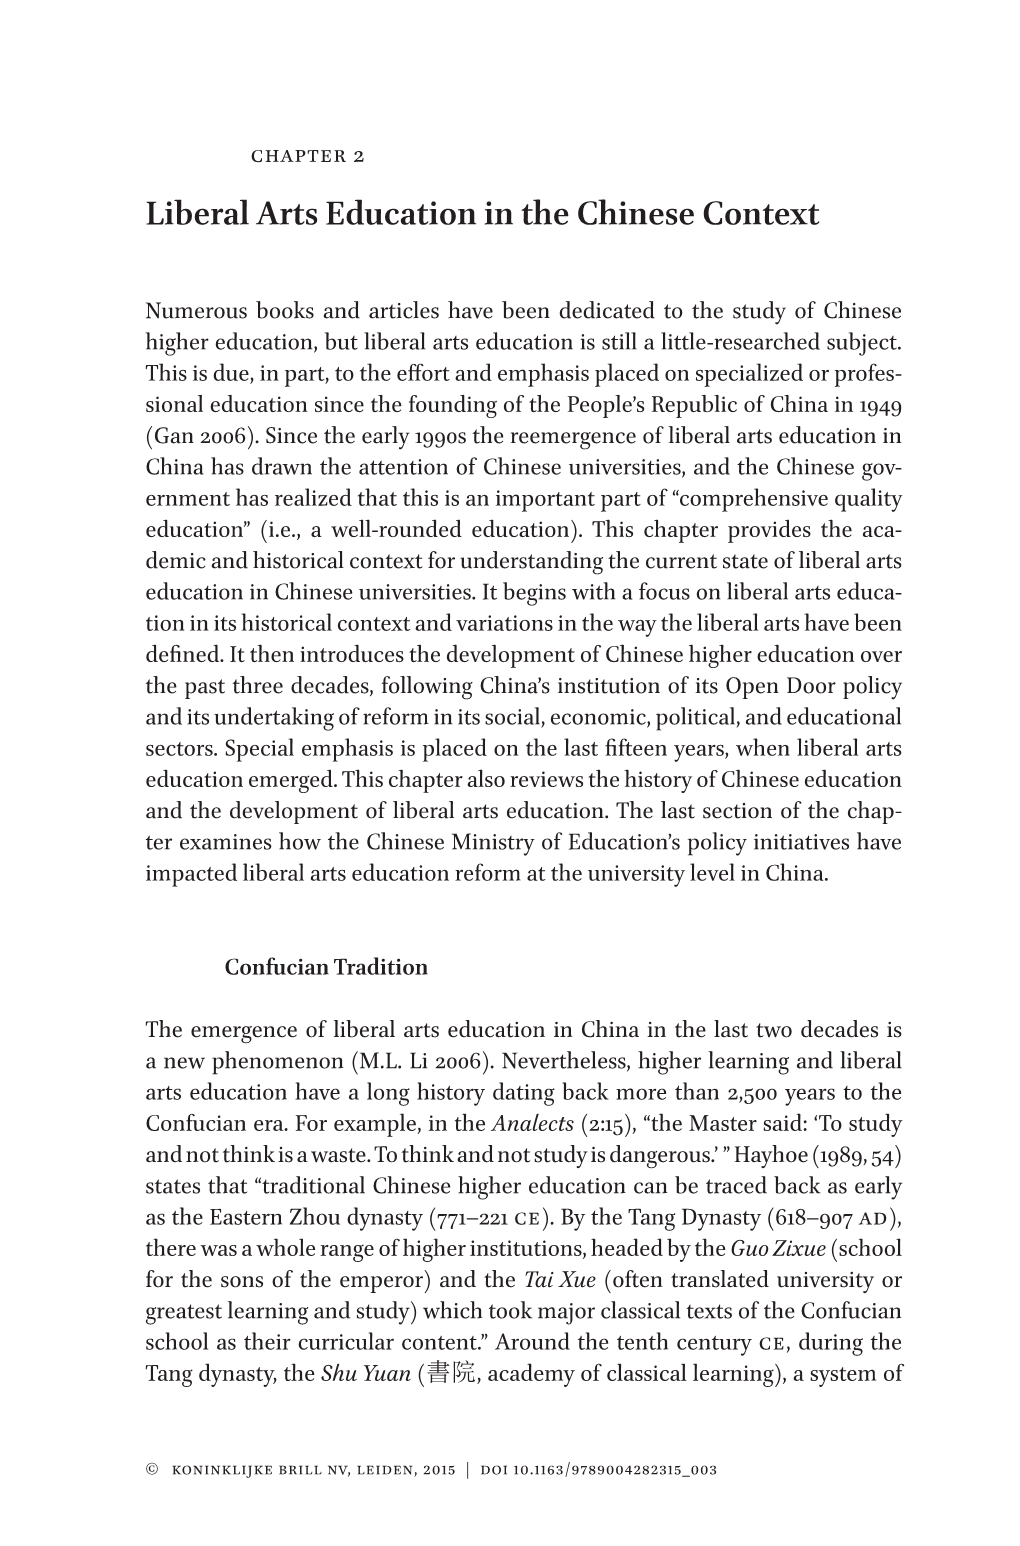 Liberal Arts Education in the Chinese Context